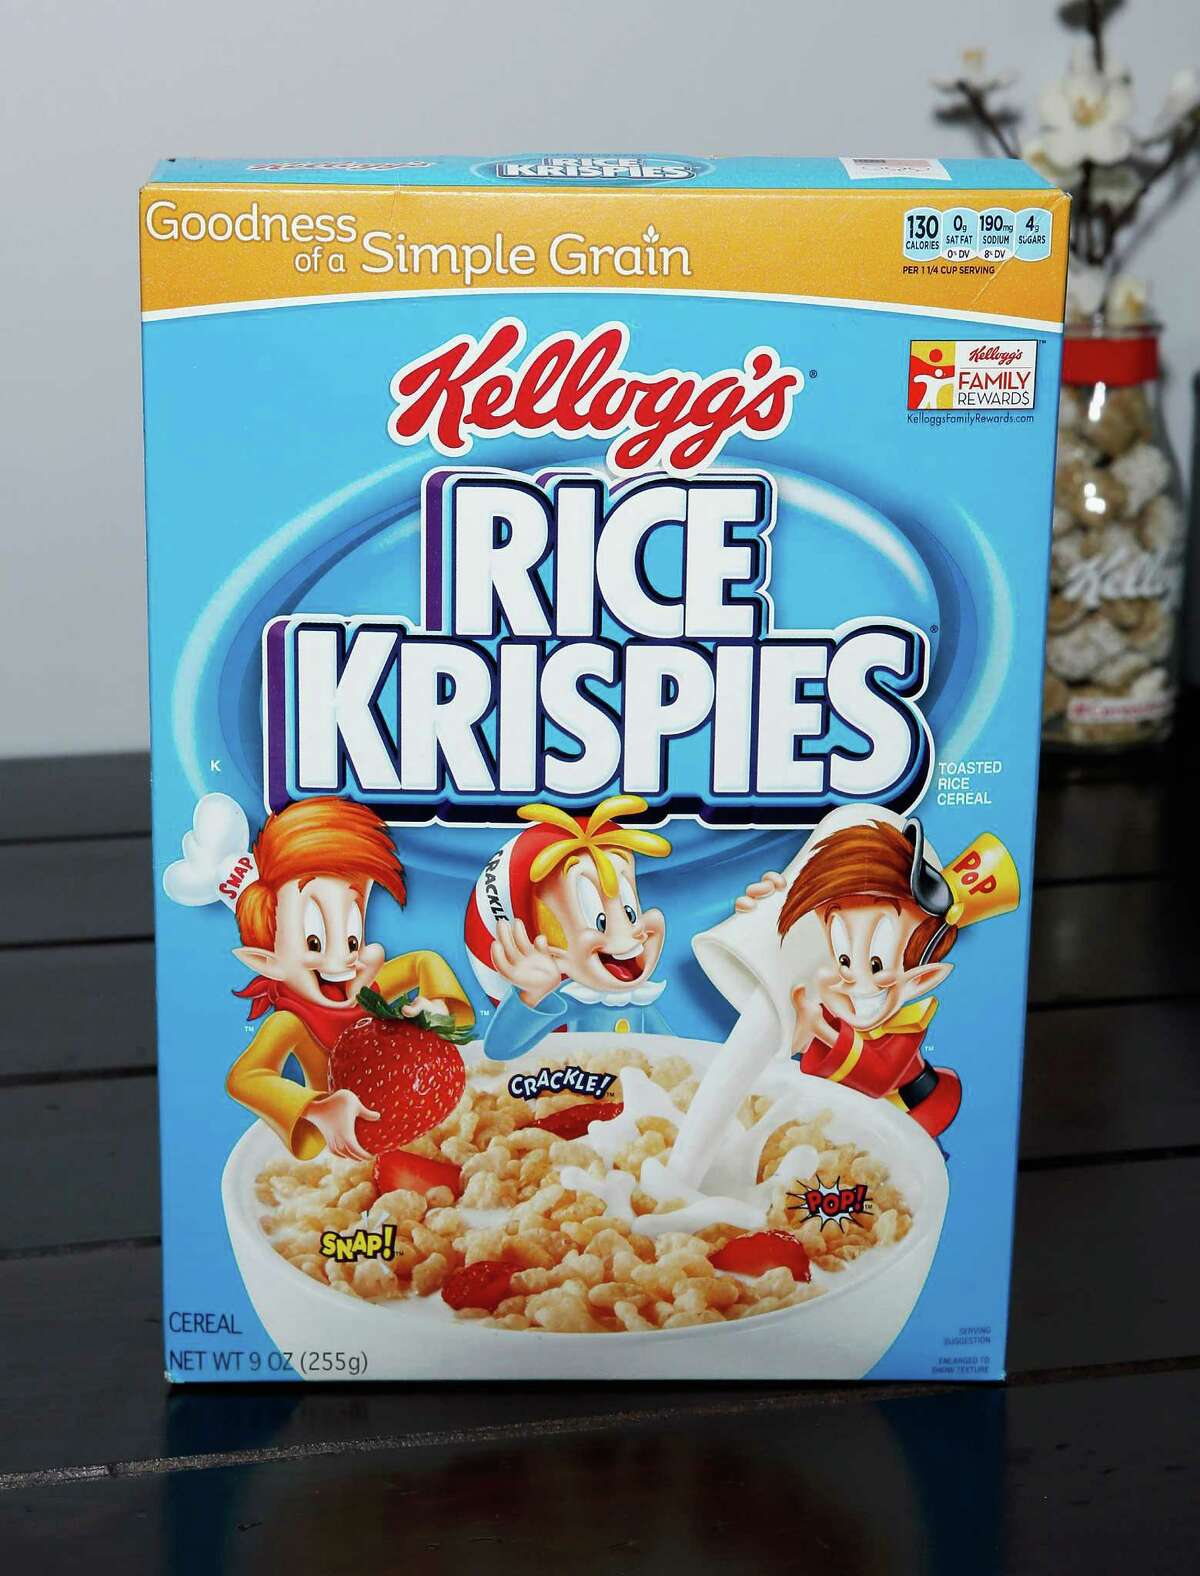 Nothing says breakfast on a Saturday morning with cartoons more than Kellogg's Rice Krispies.